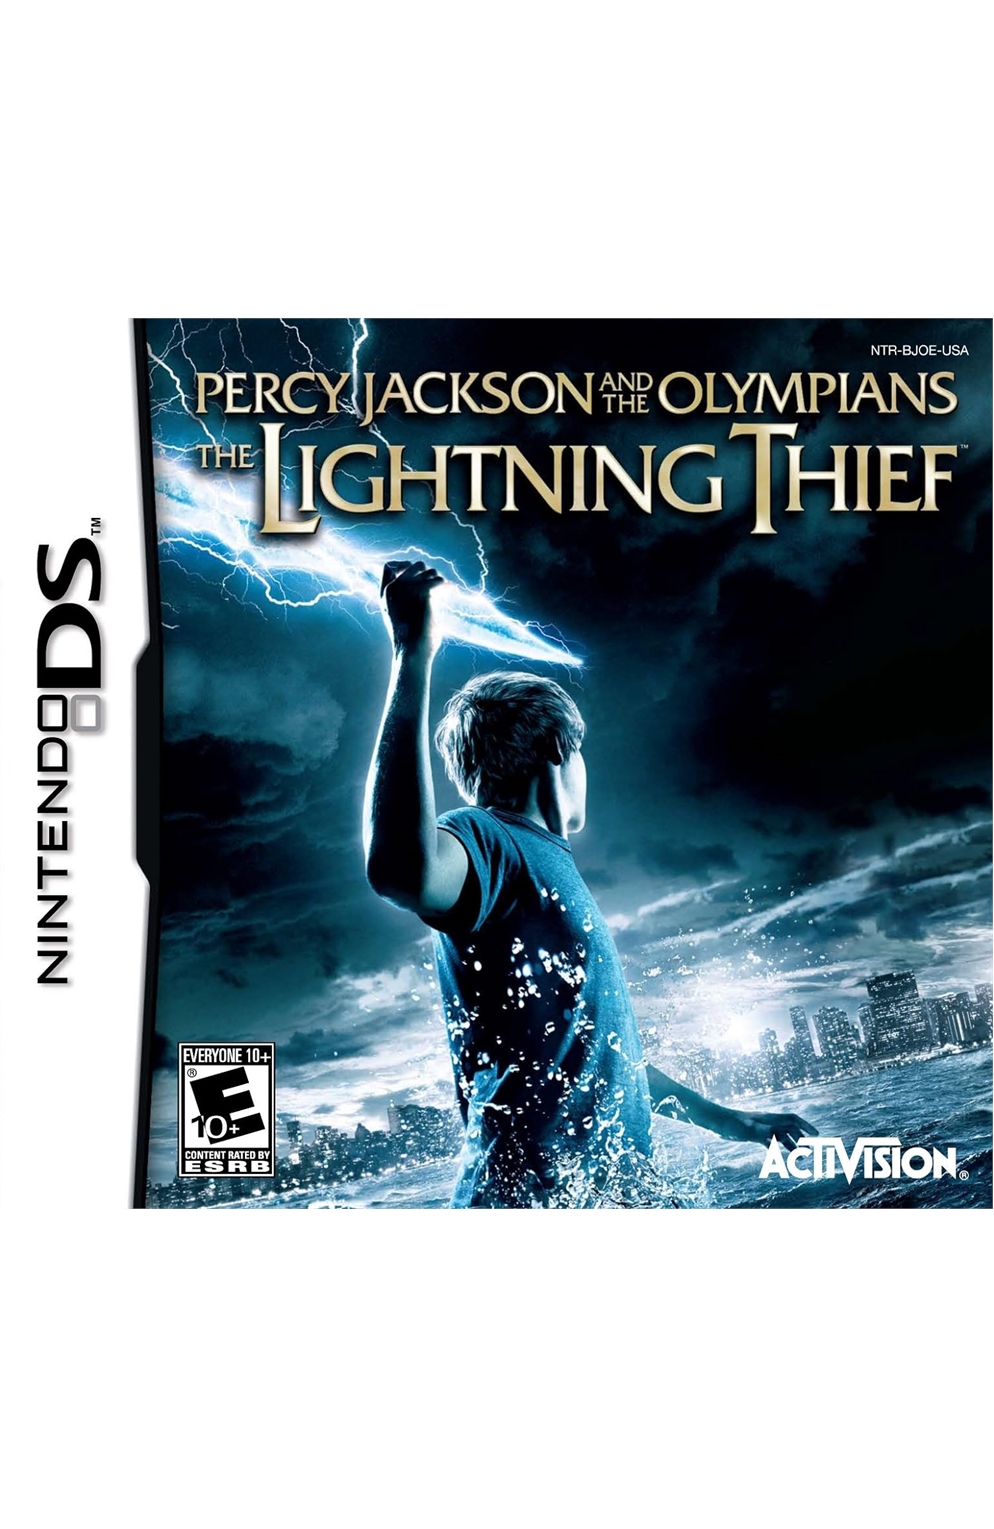 Nintendo Ds Percy Jackson And The Olympians The Lightning Thief